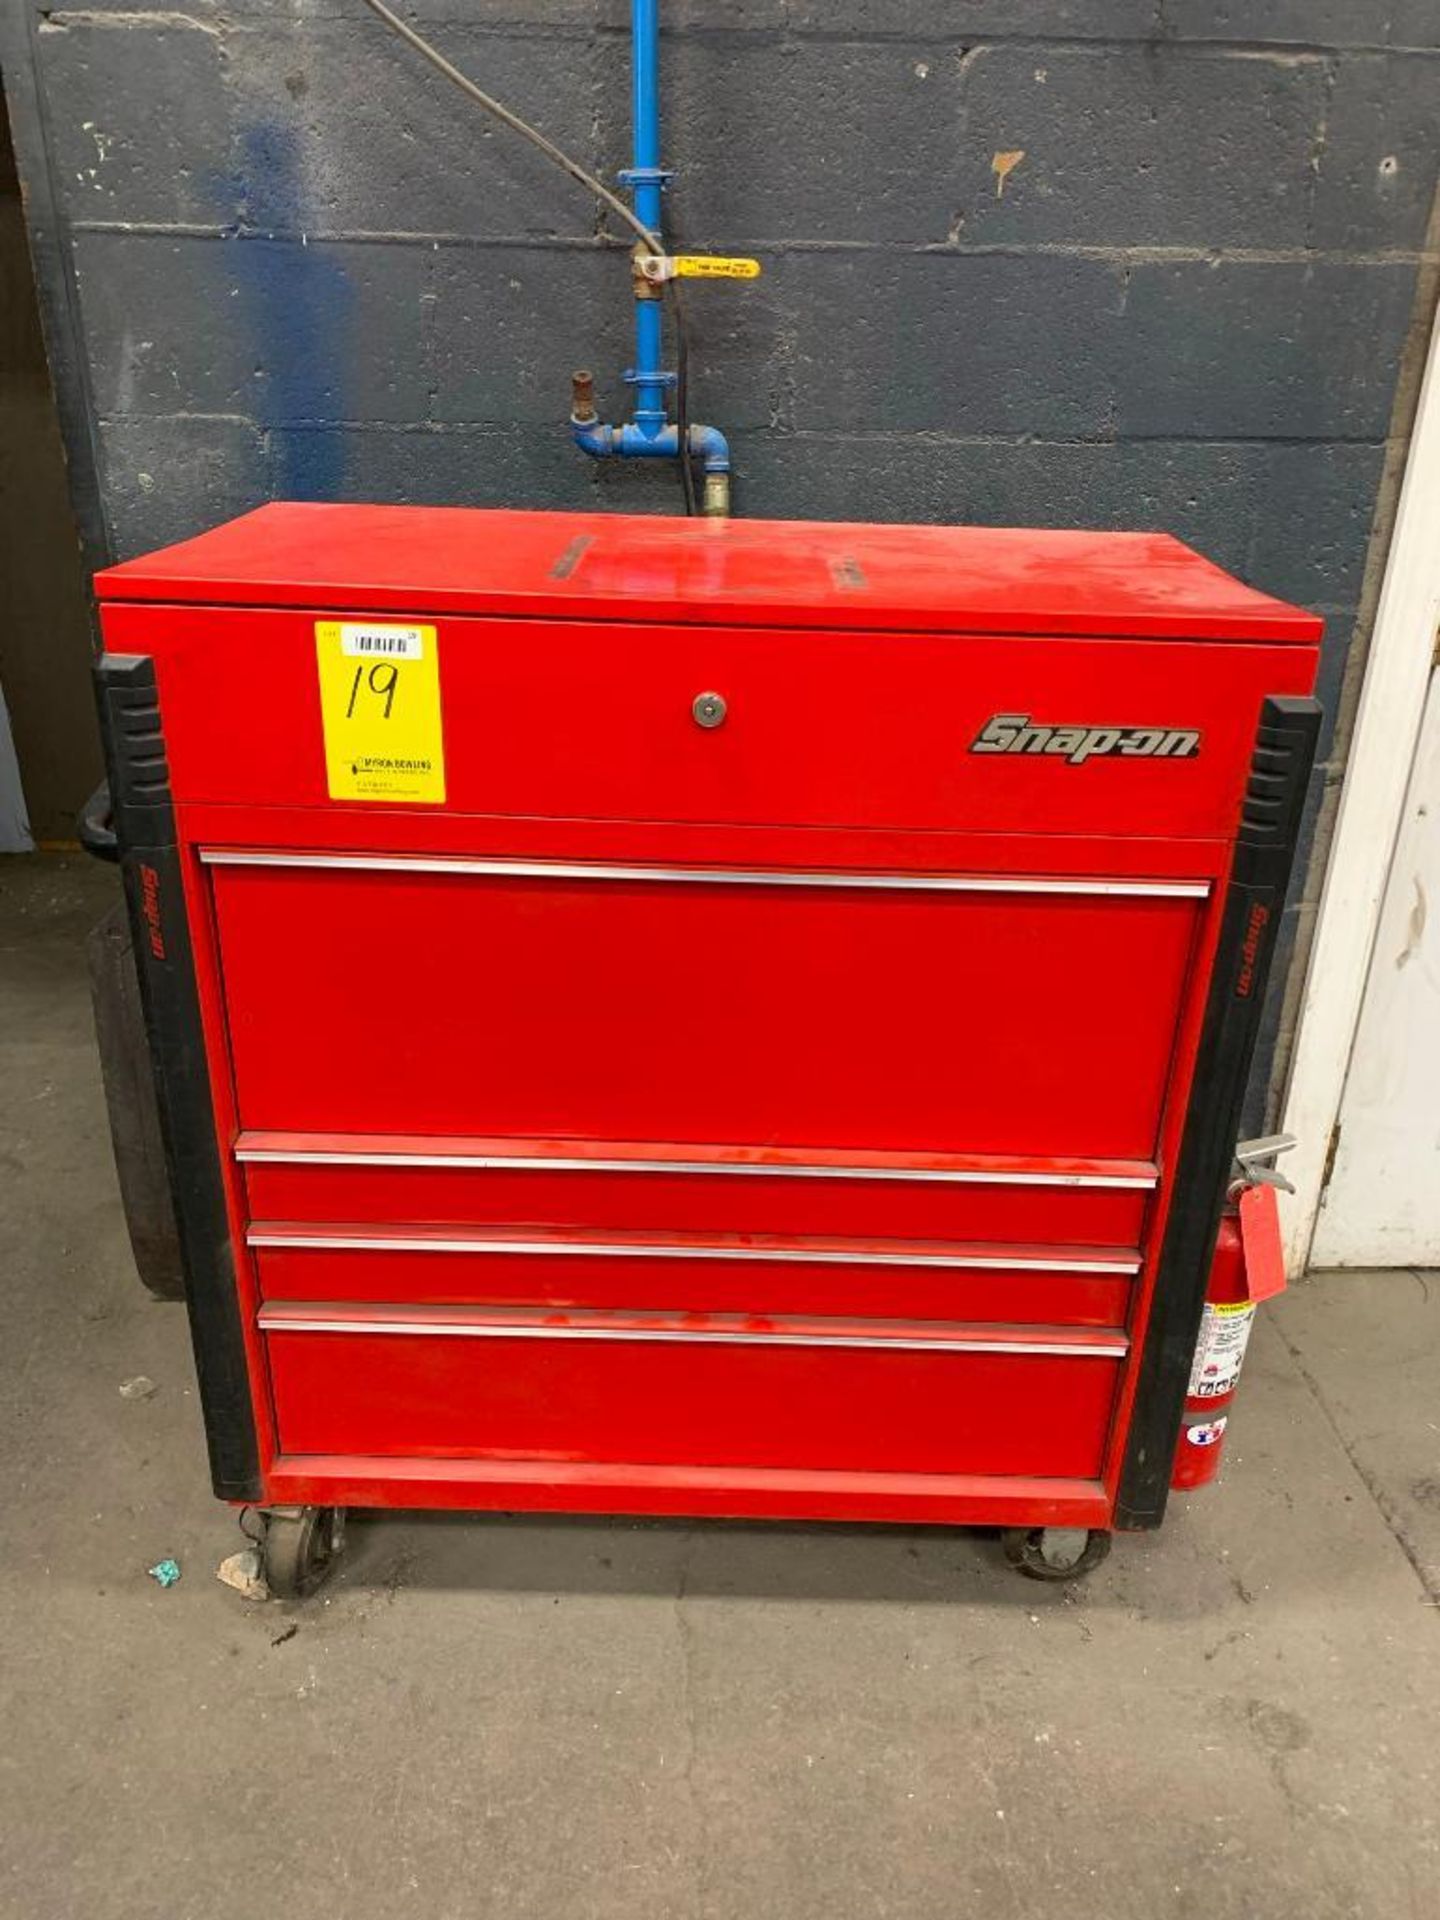 SNAP-ON TOOL CHEST, W/ CONTENT: SNAP-ON VERUS PRO SCANNER, SCANNER ADAPTOR CORDS, MONITOR, PRINTER